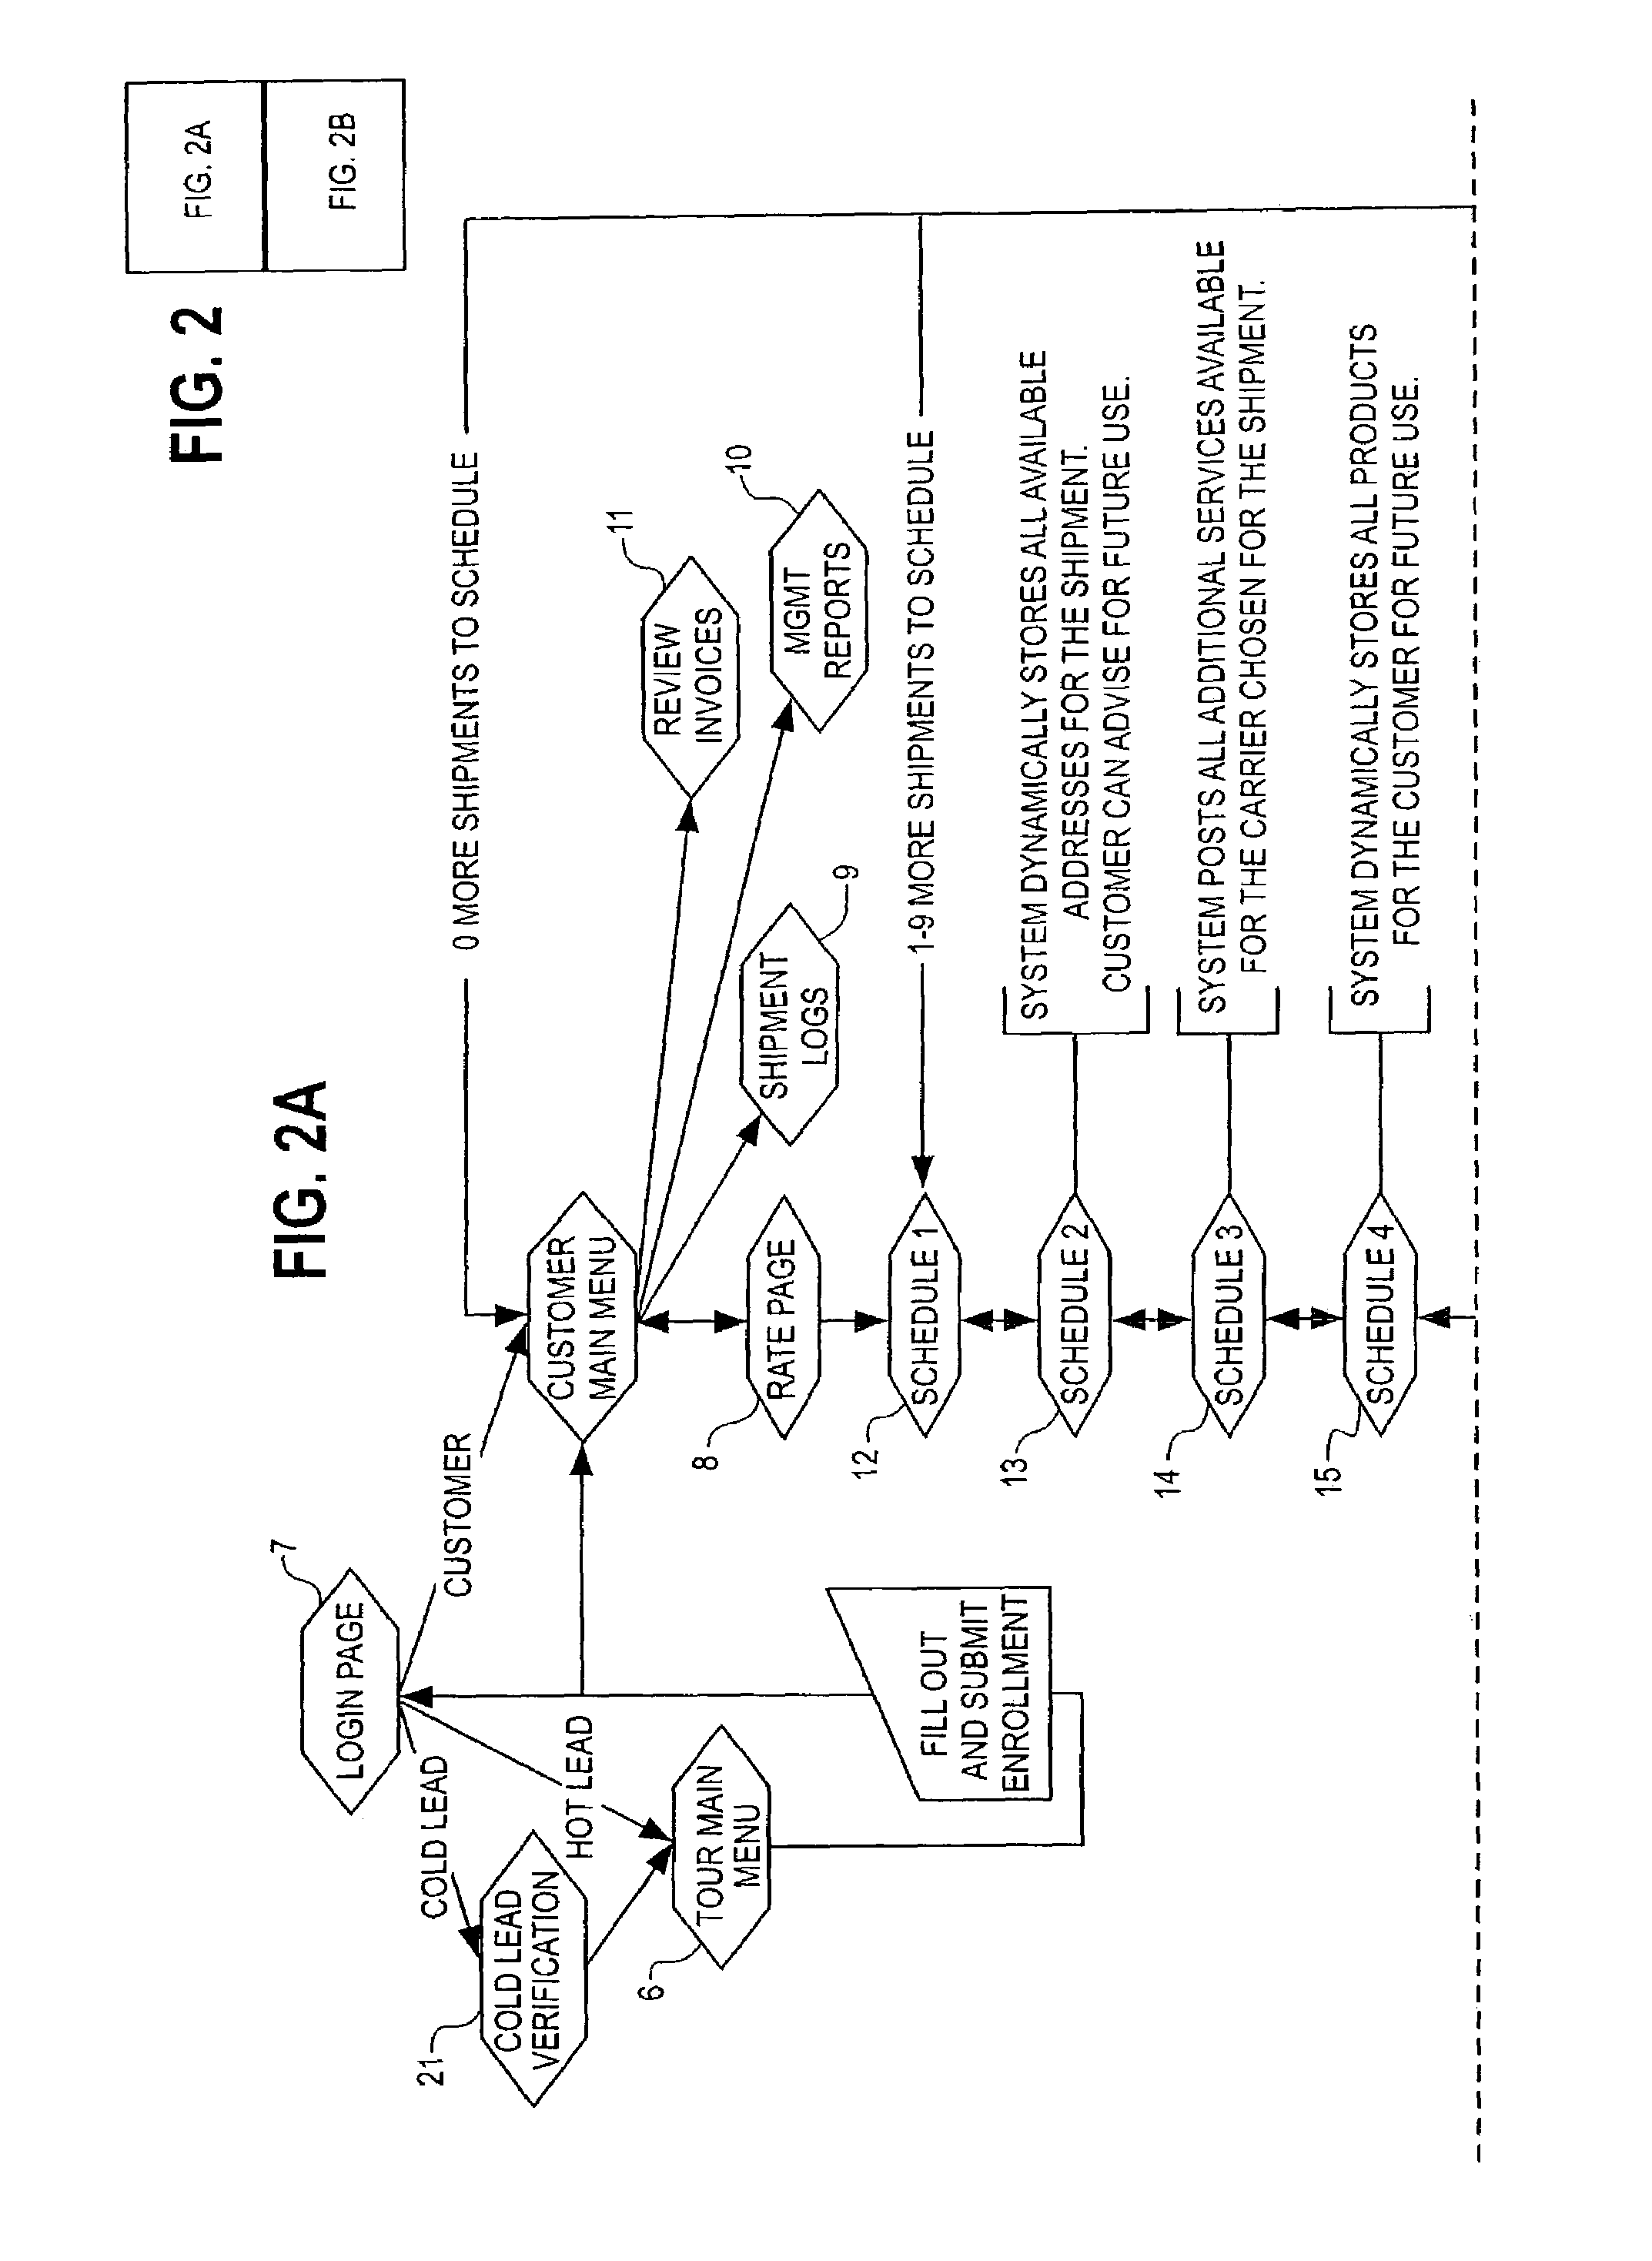 System and method for marketing over computer networks